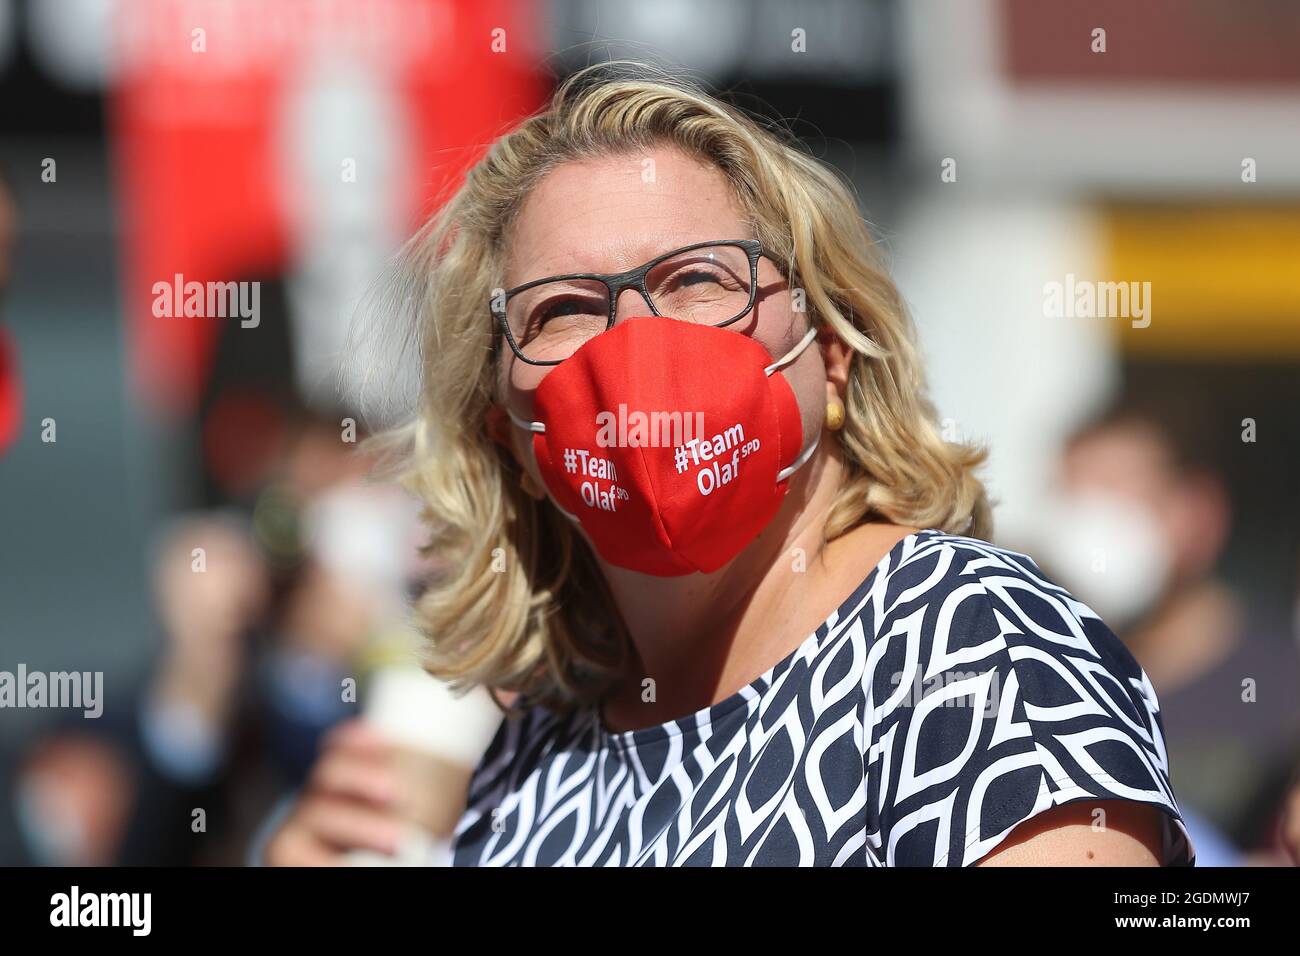 Bochum, Germany. 14th Aug, 2021. Svenja Schulze, (SPD) Federal Minister for the Environment, sits with a mouth guard with the inscription "Team Olaf SPD" on Dr. Rur Platz in Bochum. SPD candidate for chancellor Scholz starts the hot phase of the election campaign in the Ruhr area. Around six weeks before the federal election, he is speaking in the city centre of Bochum to kick off his tour. Credit: David Young/dpa/Alamy Live News Stock Photo